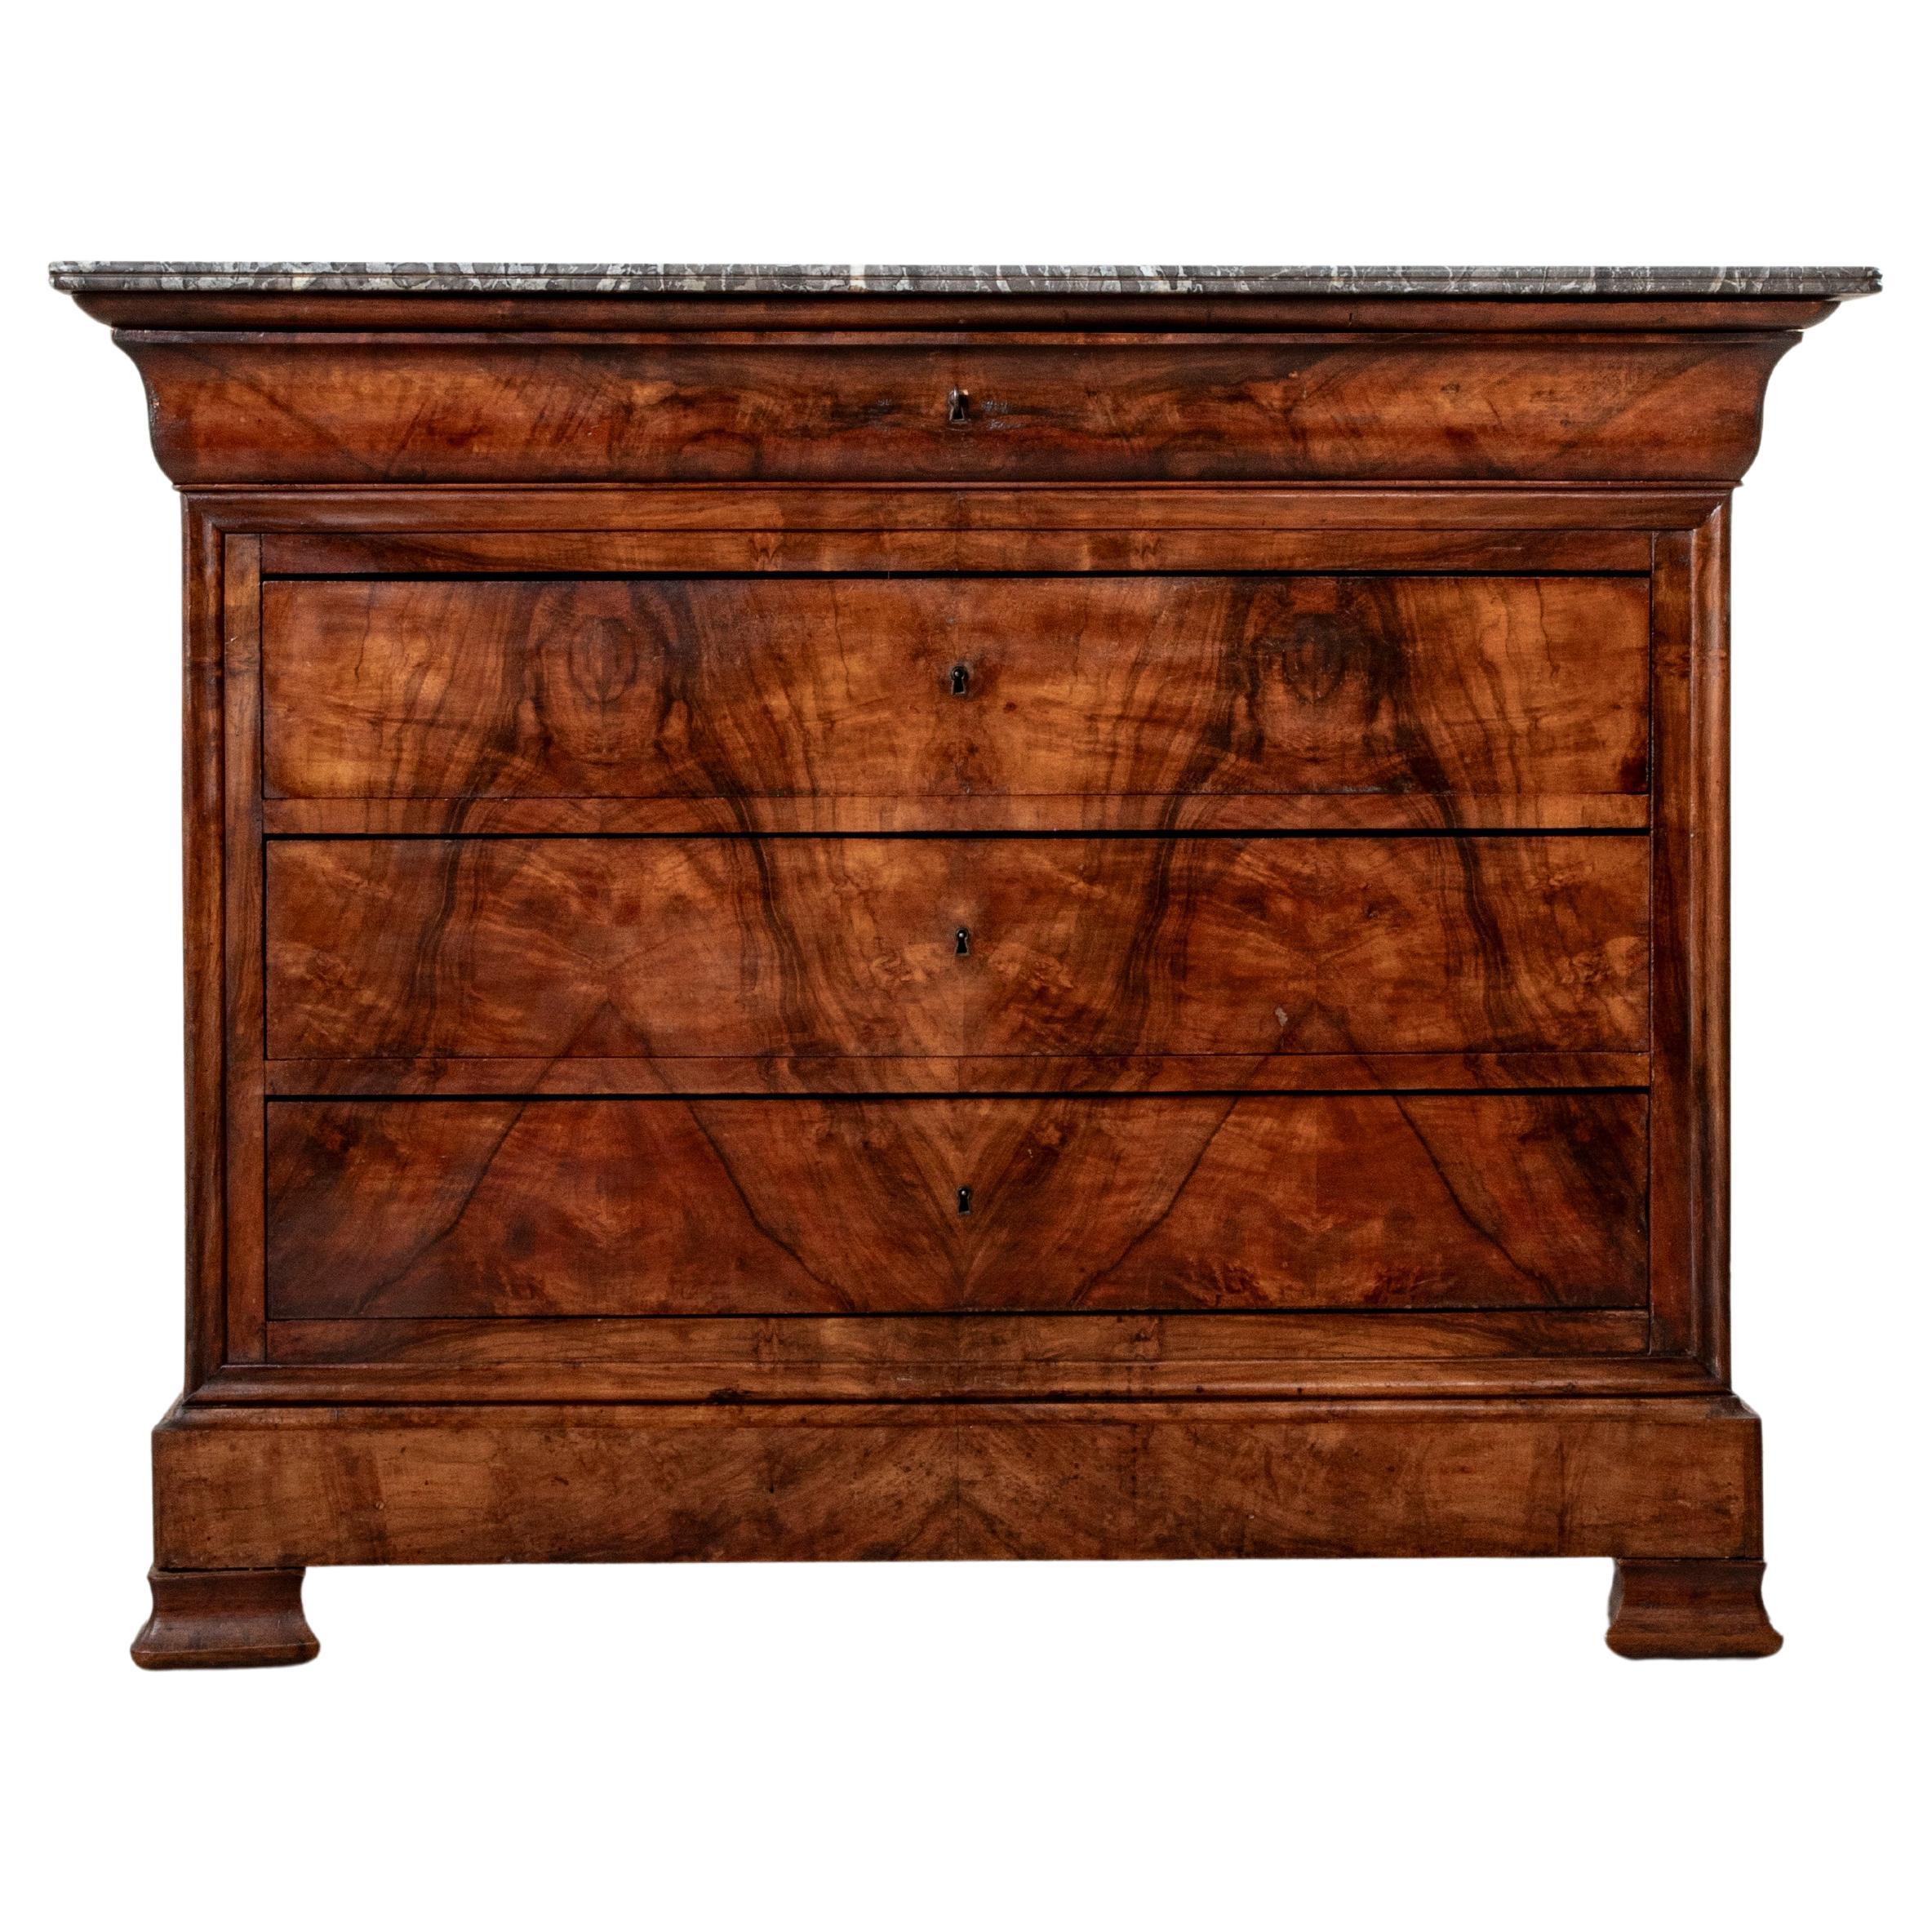 19th Century French Louis Philippe Period Burl Walnut Commode or Chest, Marble